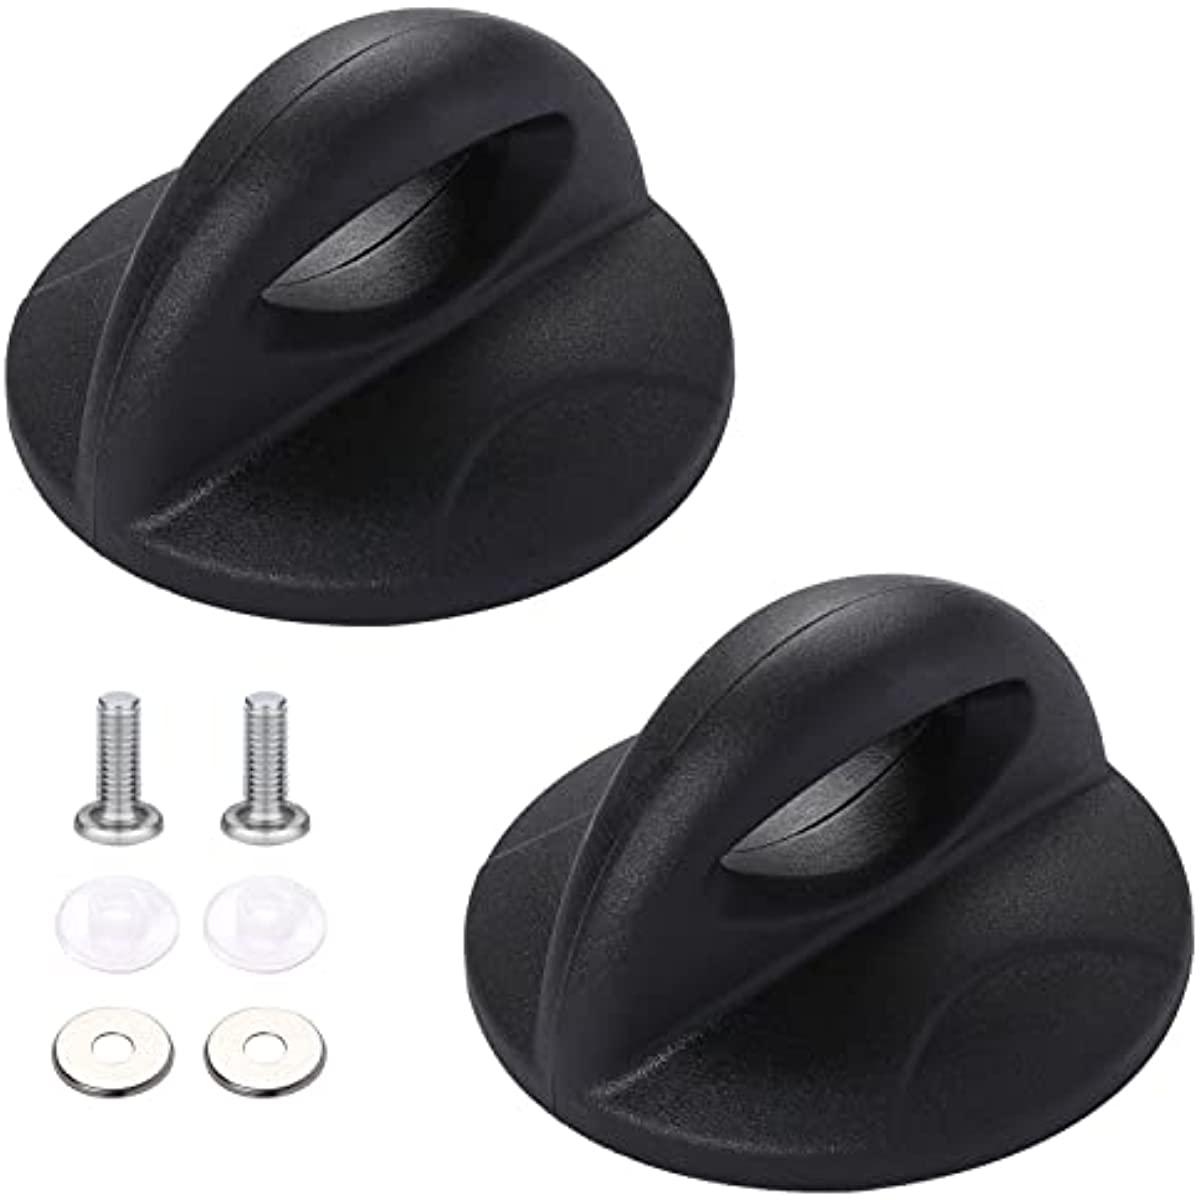 Universal Pot Lid Knobs, Pan Lid Holding Handles for Rival